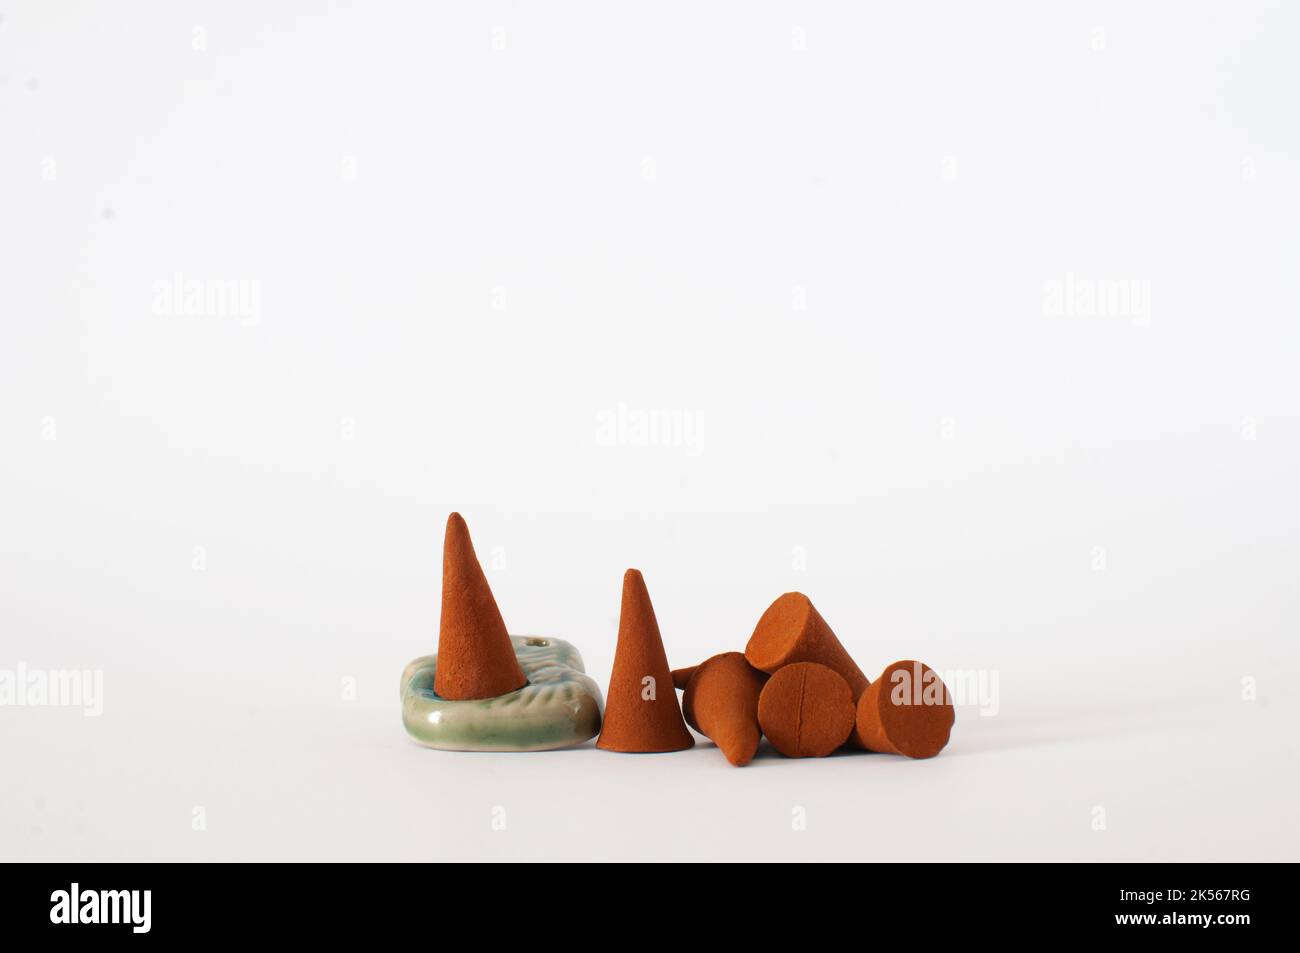 Group of natural aroma brown incense cones with ceramic holder isolated on white background with selective focus. Stock Photo